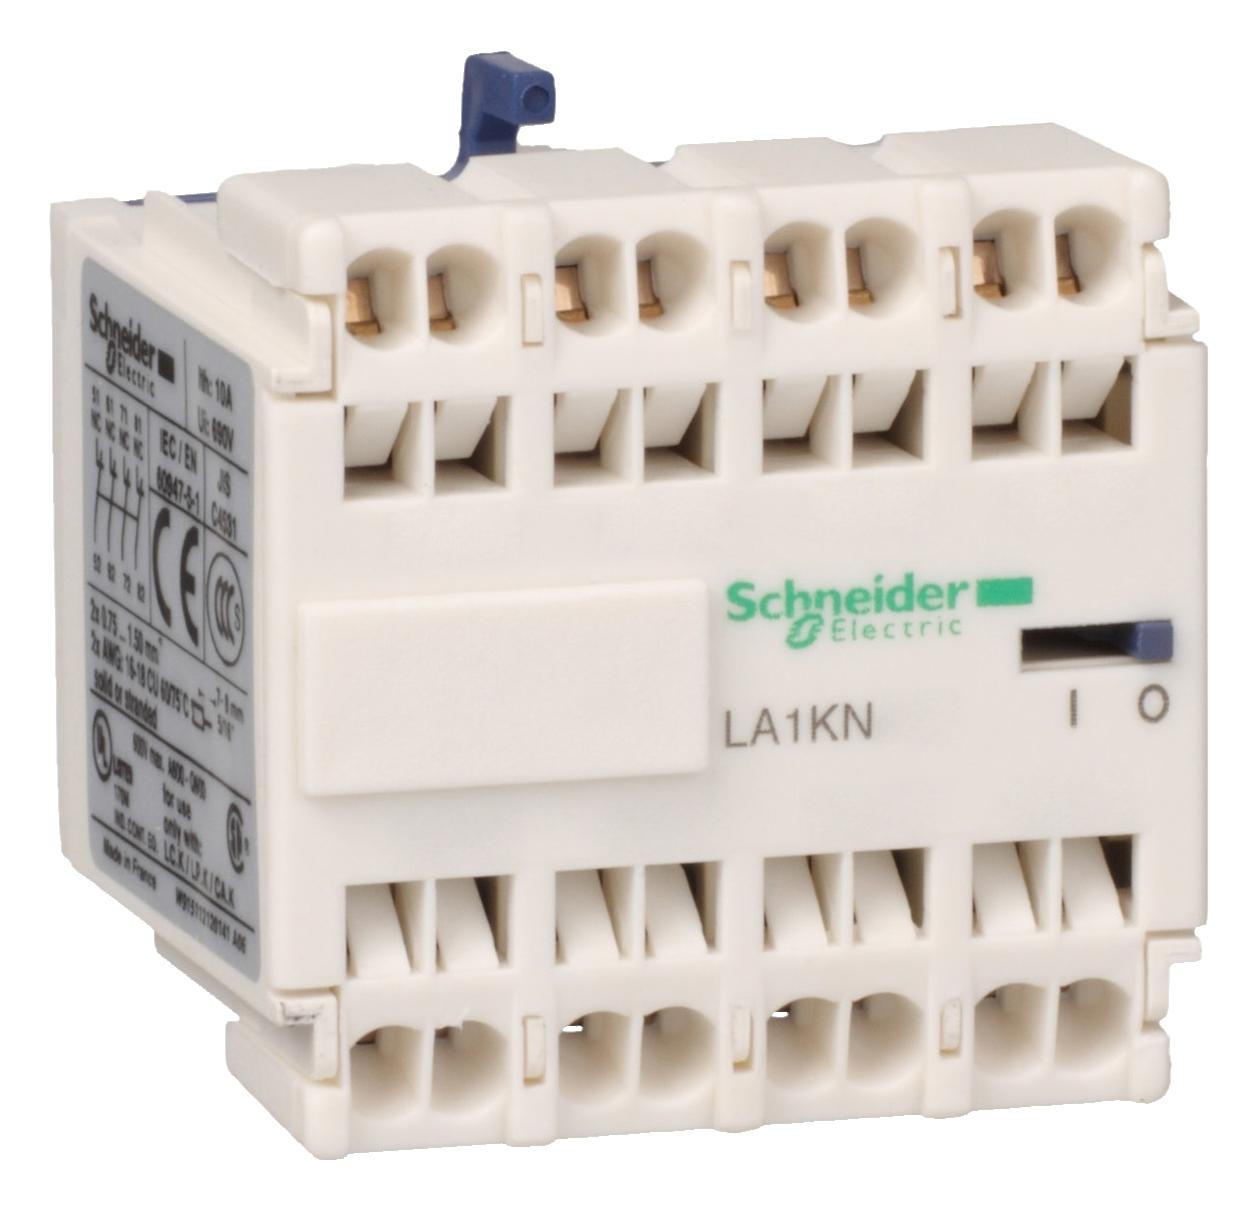 LA1KN133 AUXILIARY CONTACTS SCHNEIDER ELECTRIC